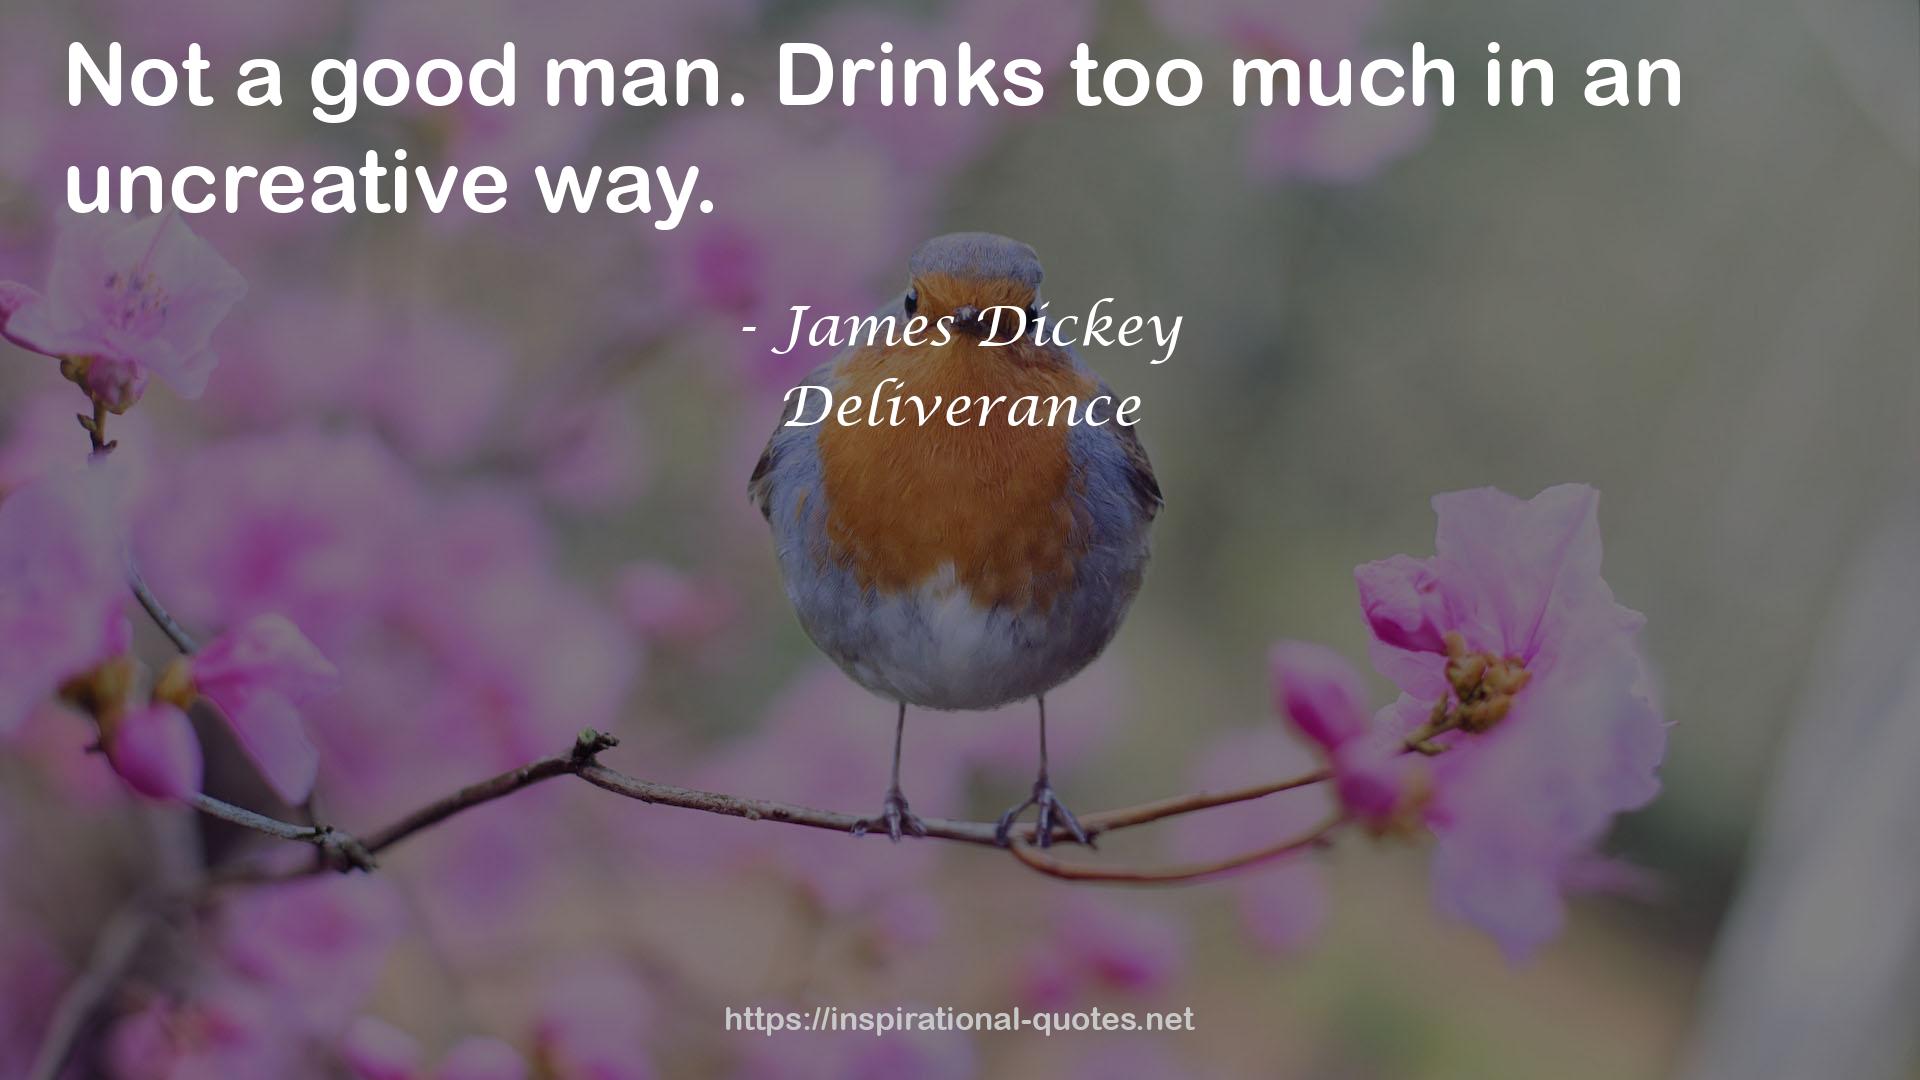 James Dickey QUOTES